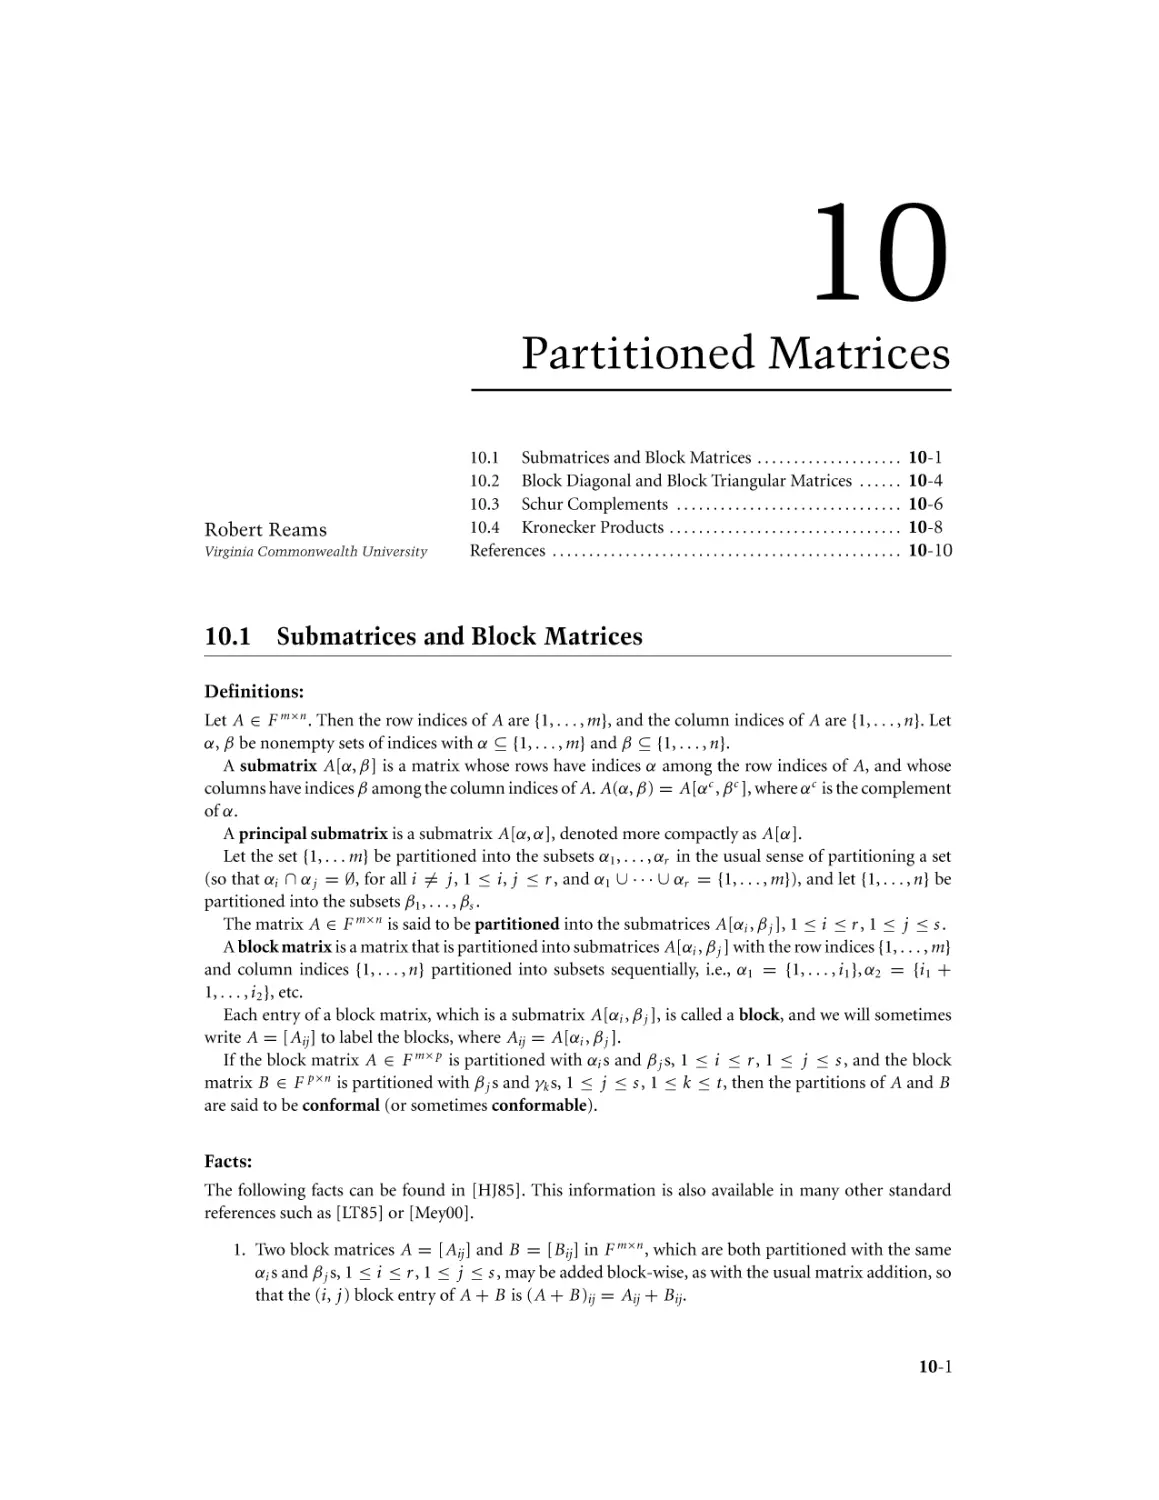 Chapter 10. Partitioned Matrices